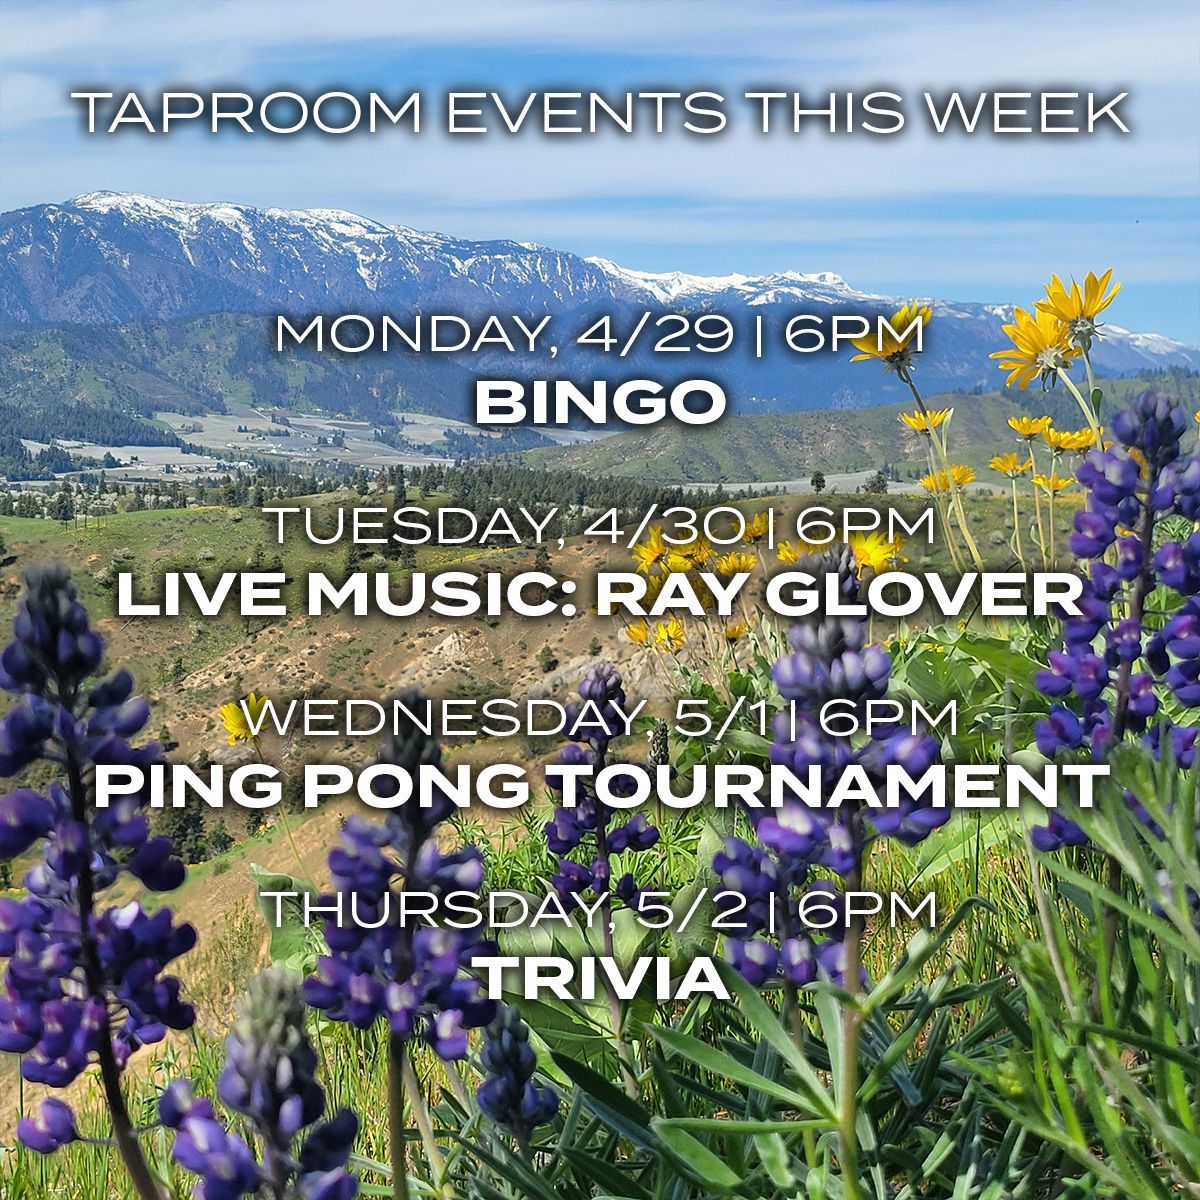 Great events at our taproom this week starting at 6pm! Monday: Bingo, Tuesday: Live Music, Wednesday: Ping Pong Tournament, Thursday: Trivia!